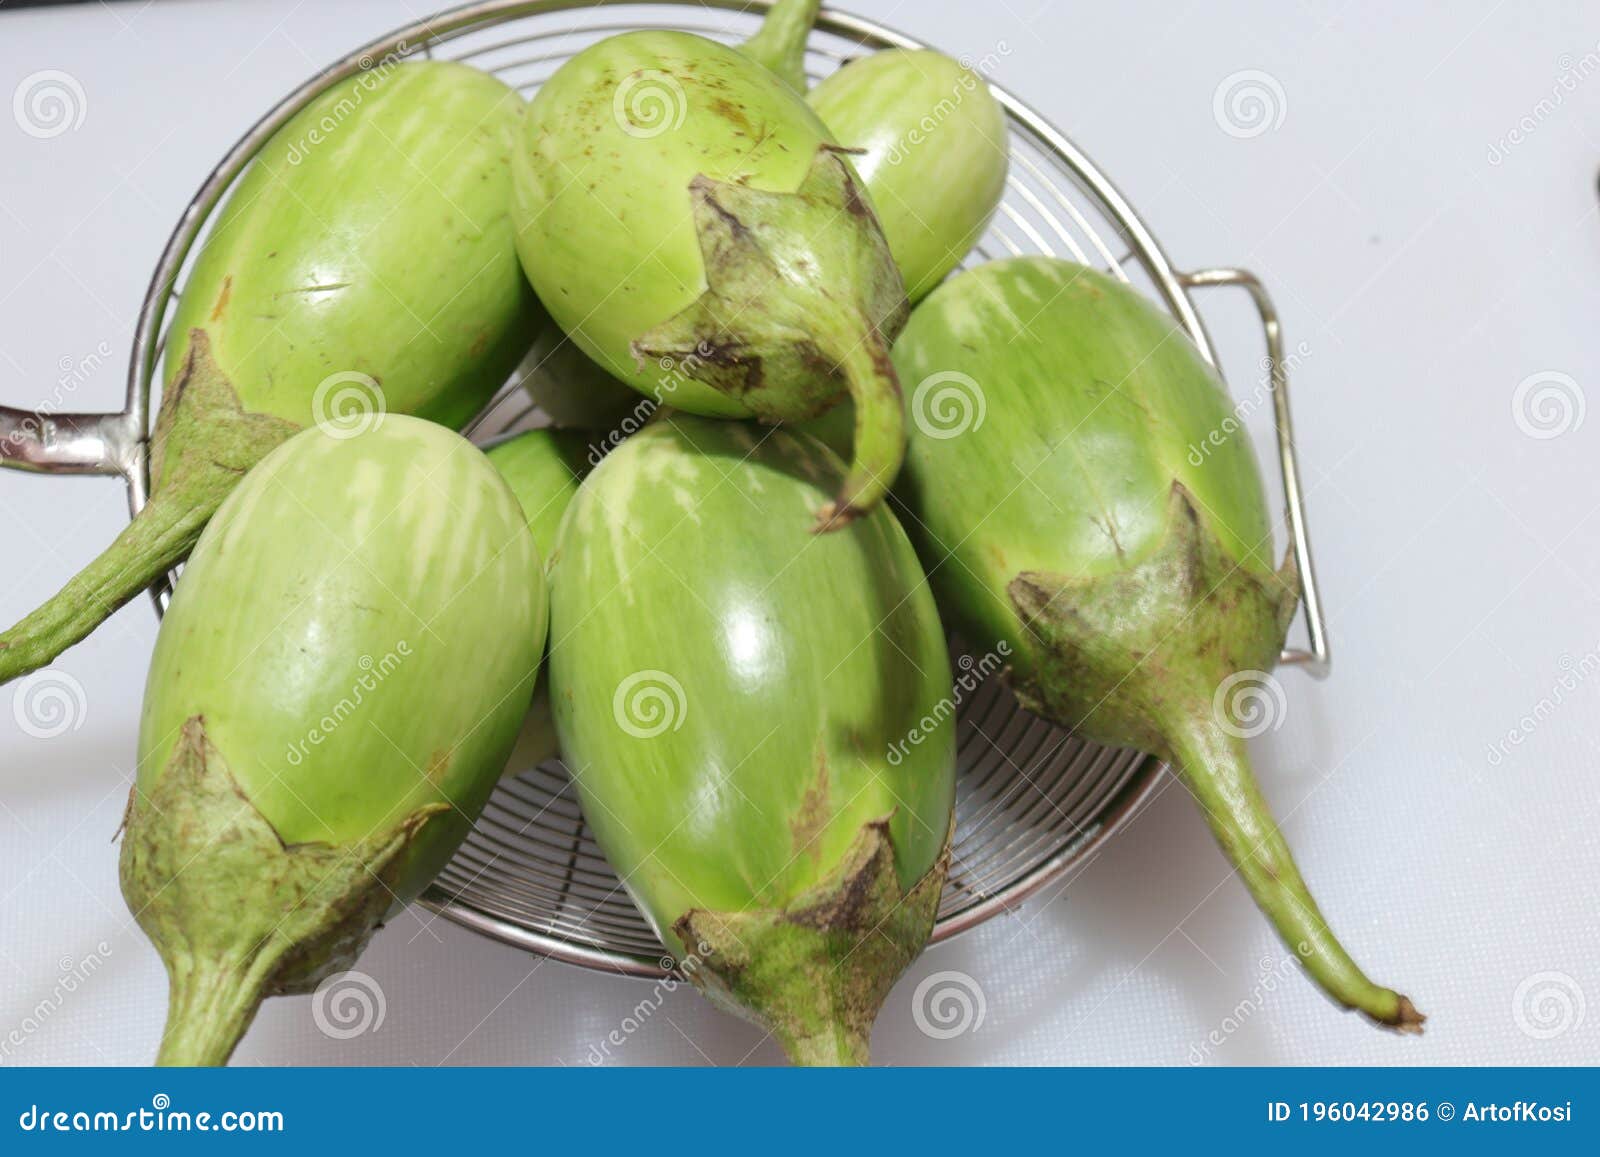 Fresh Raw Sliced Green Colour Eggplant Brinjal or Eggplant Isolated on  White Background Stock Photo - Image of natural, cooking: 196042986